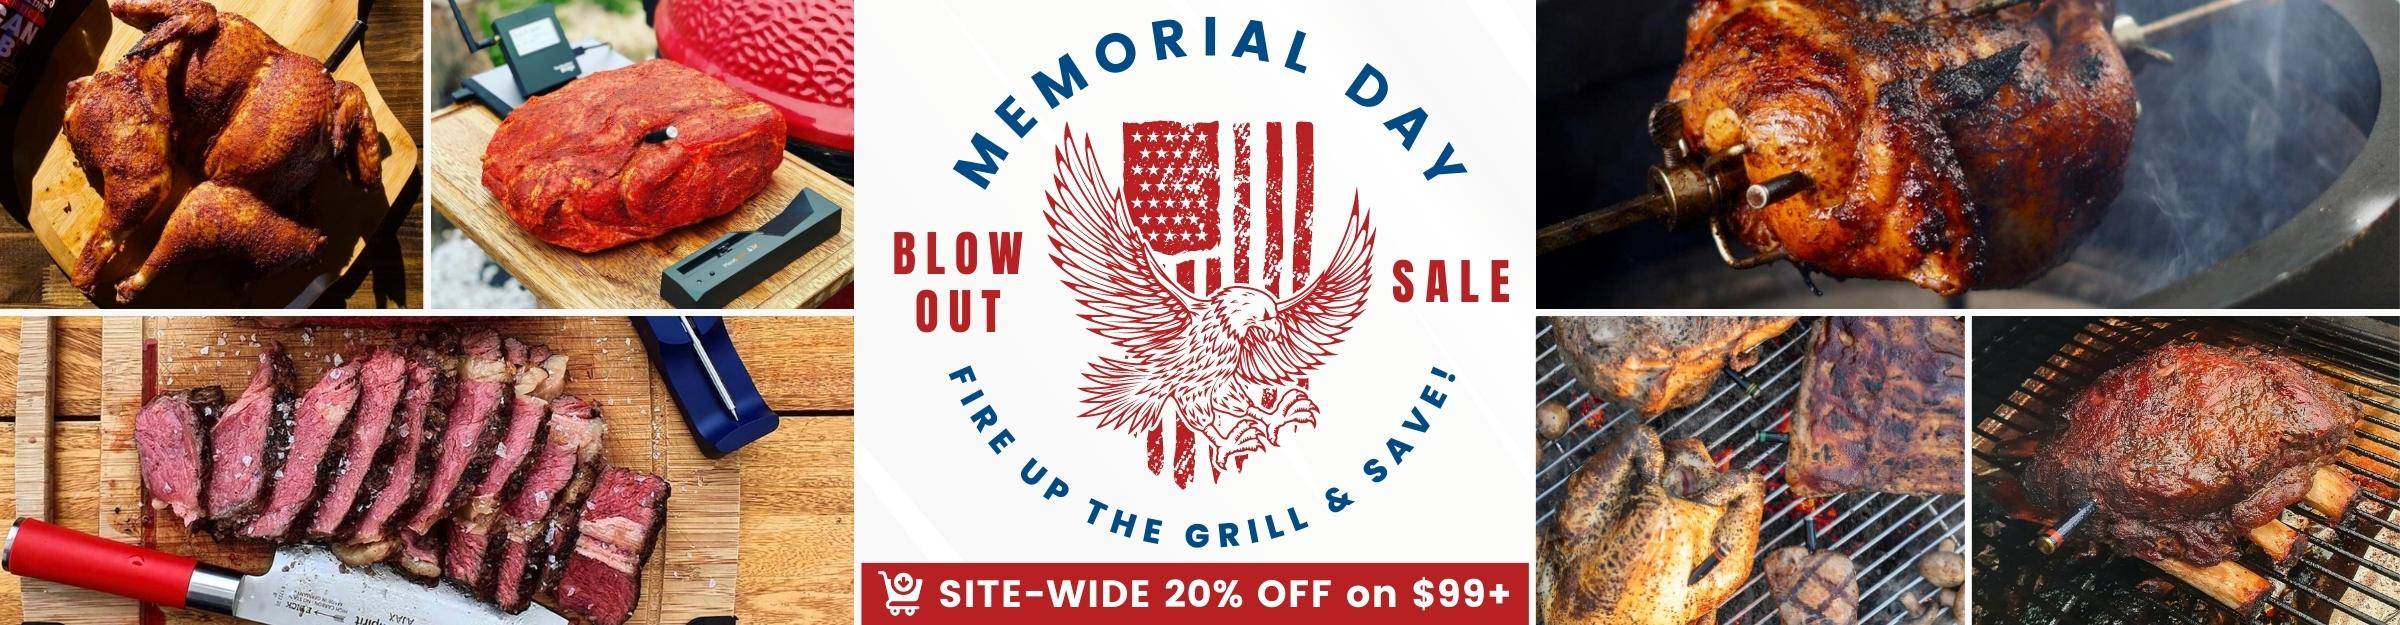 The MeatStick Memorial Day Sale with Site-Wide 20% Off on $99+